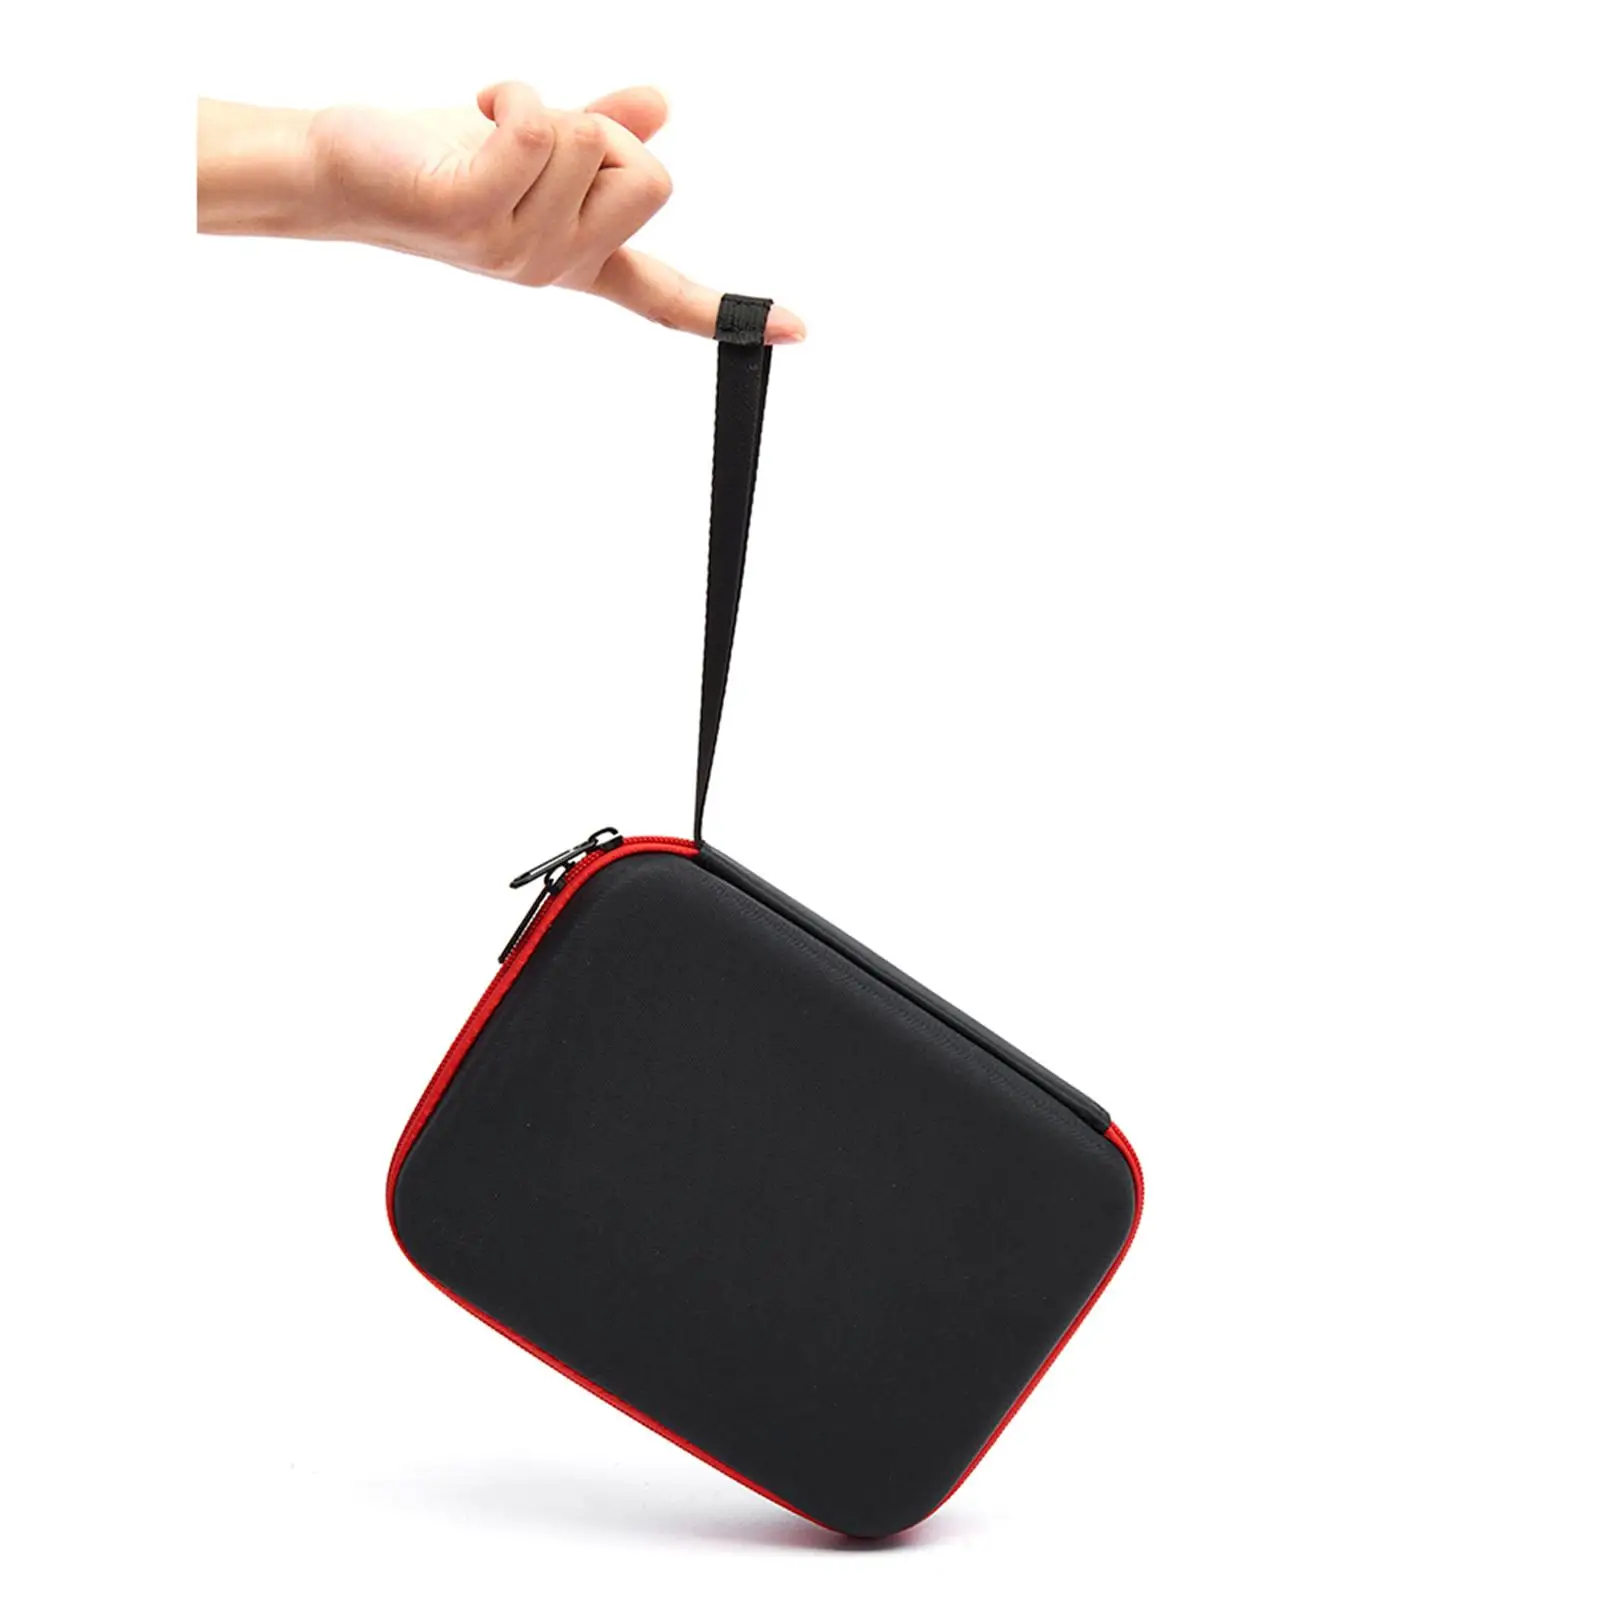 Carrying Case Accessories Handbag Durable ,Professional Portable Hard Shell Waterproof for Gimbal Stabilizer